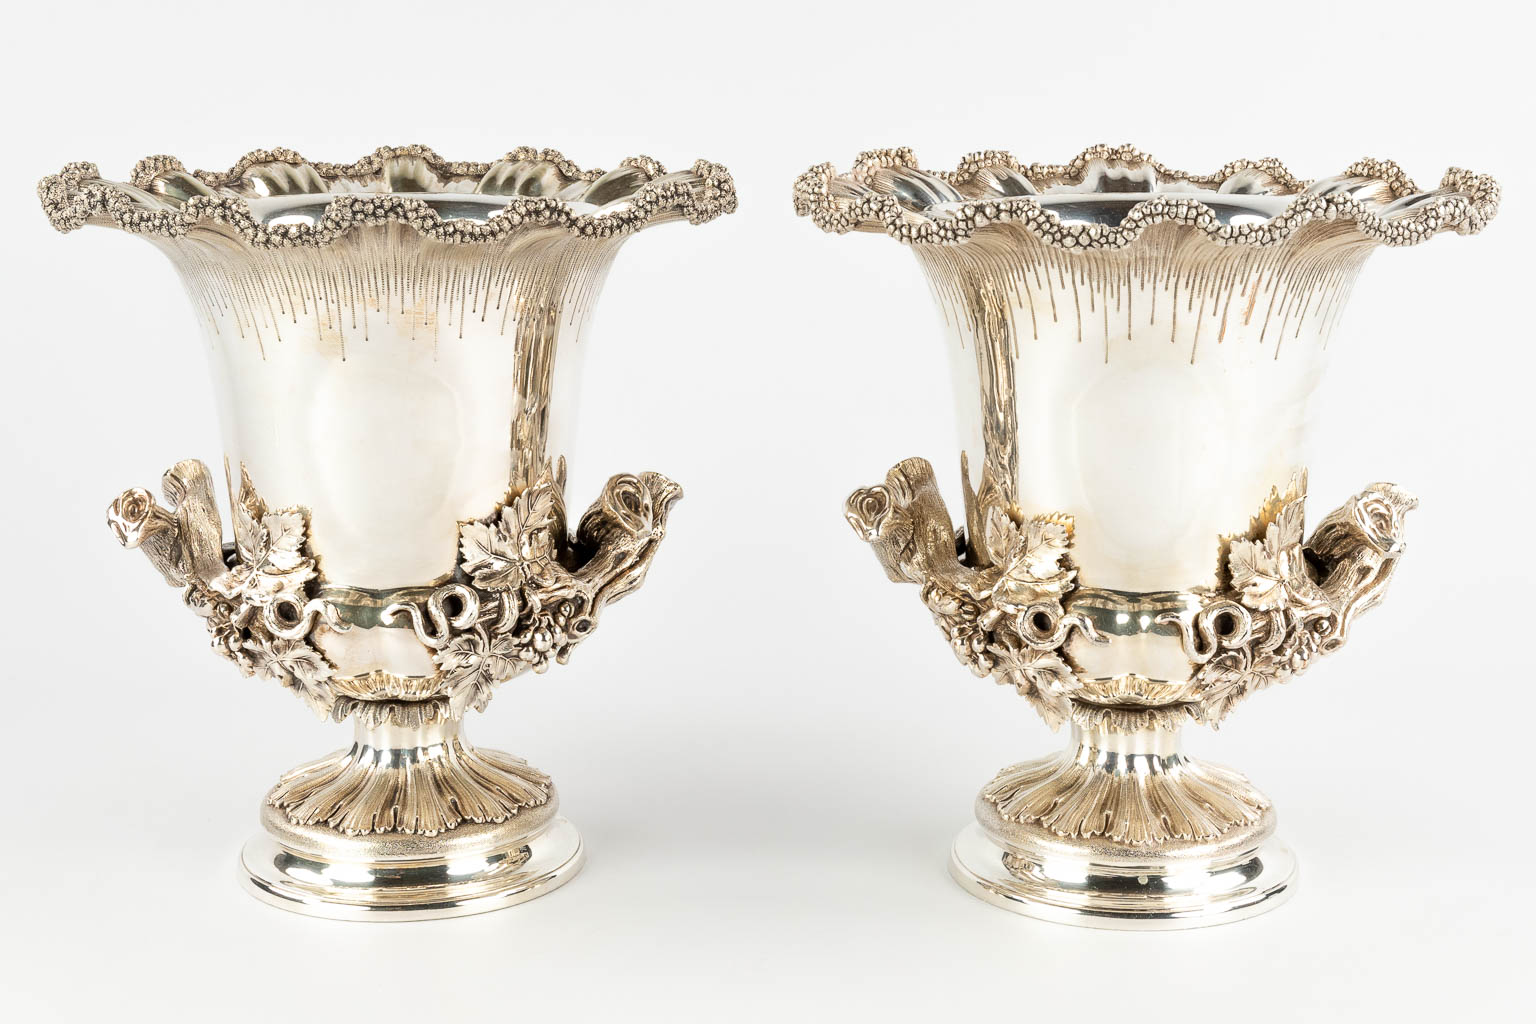 Elkington, UK, a pair of wine coolers, silver-plated metal and decorated with grape vines. 20th C. ( - Image 4 of 14